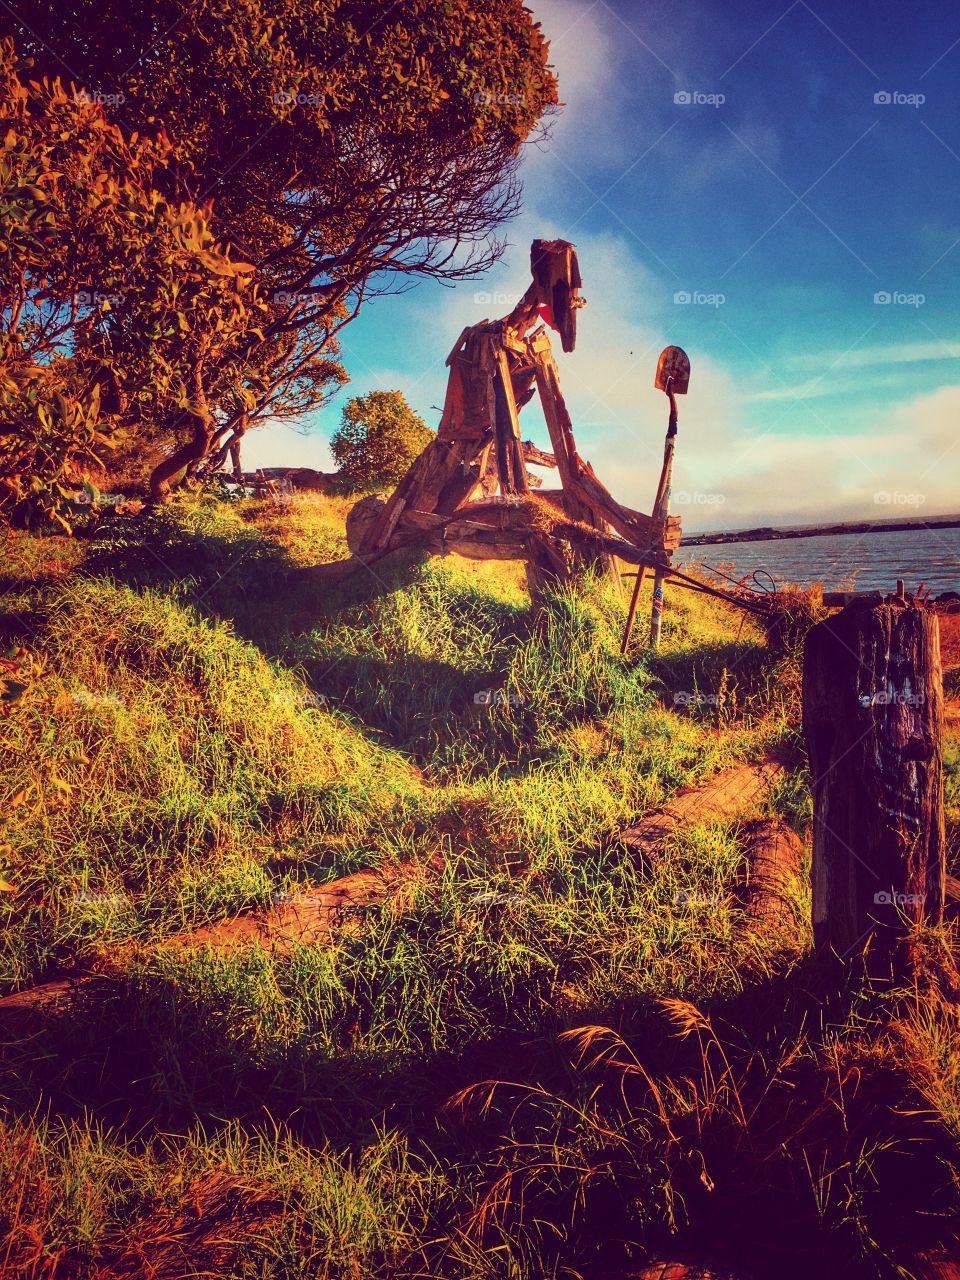 Autumn is here! Albany Bulb